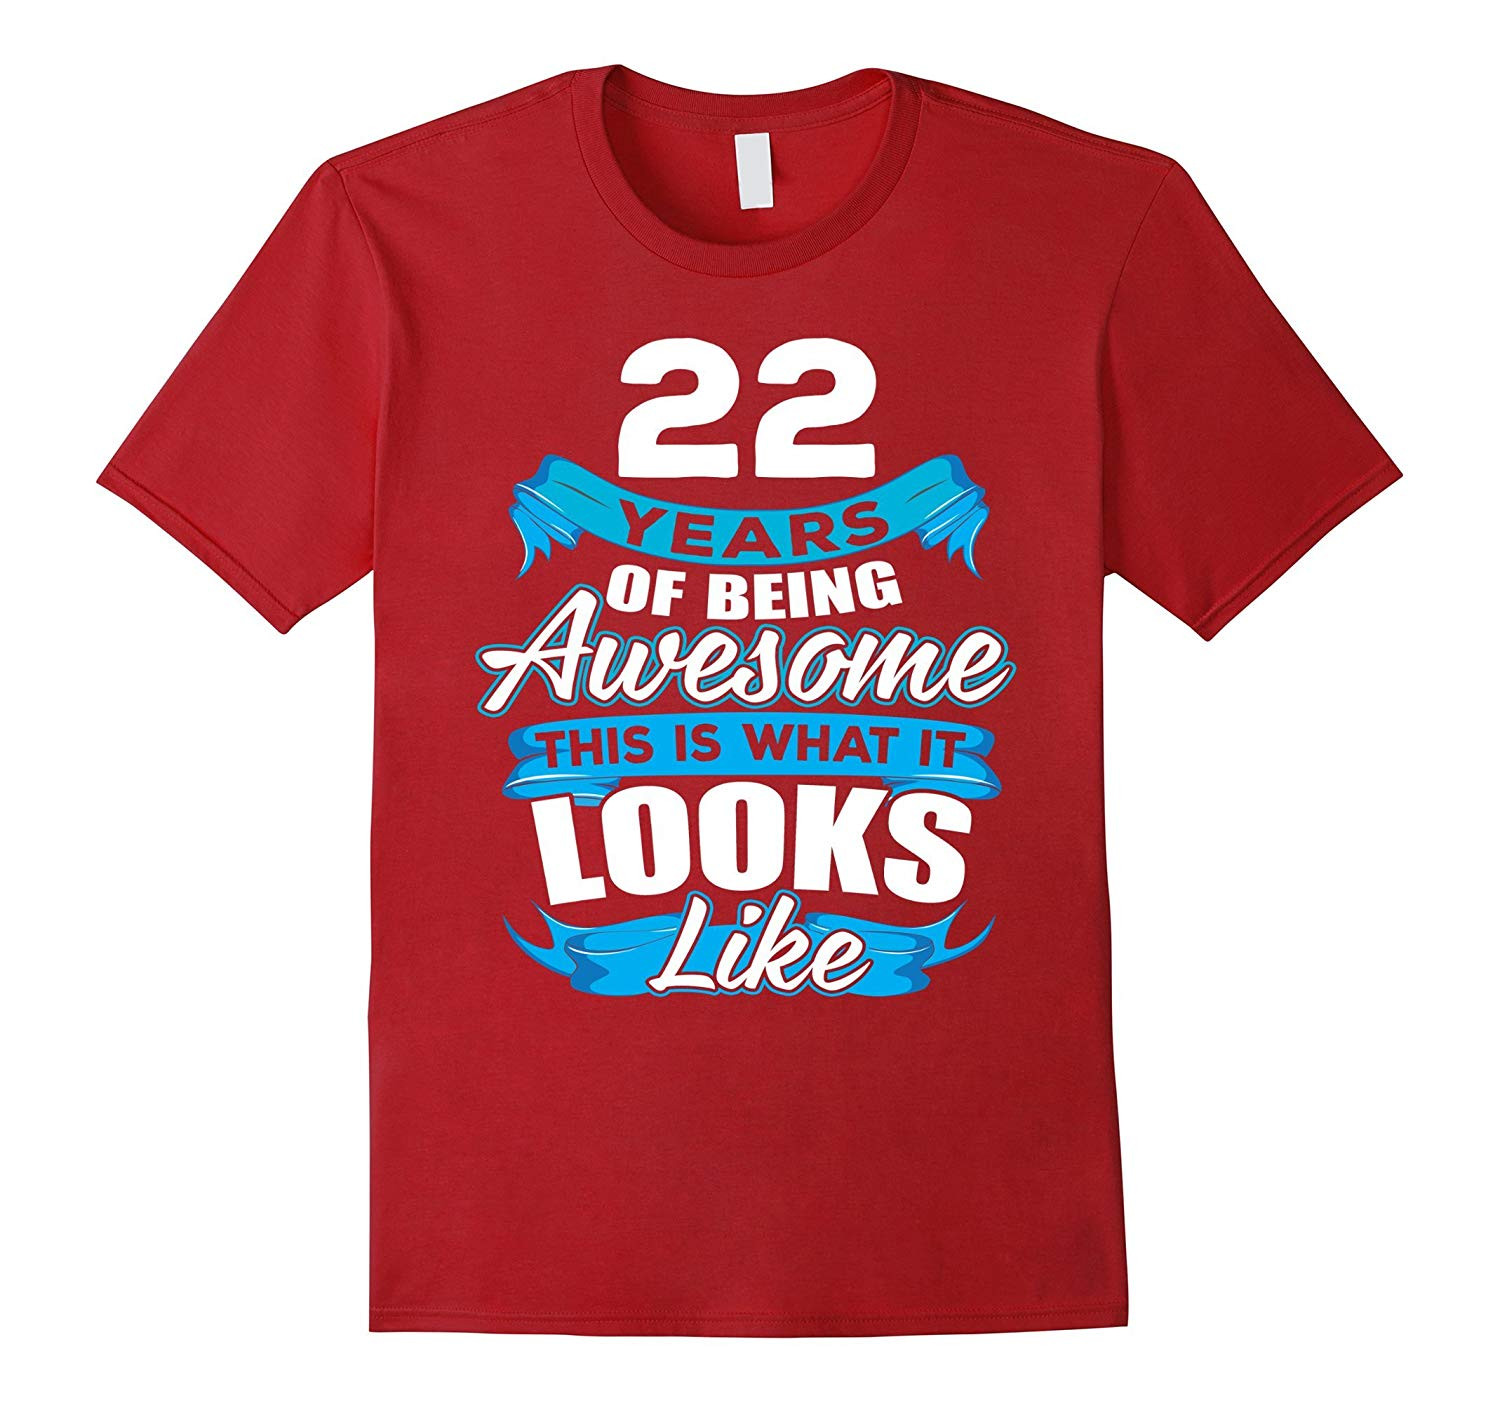 22 Year Old Birthday Gift Ideas
 22 Years Old Being Awesome Shirt – 22nd Birthday Gift